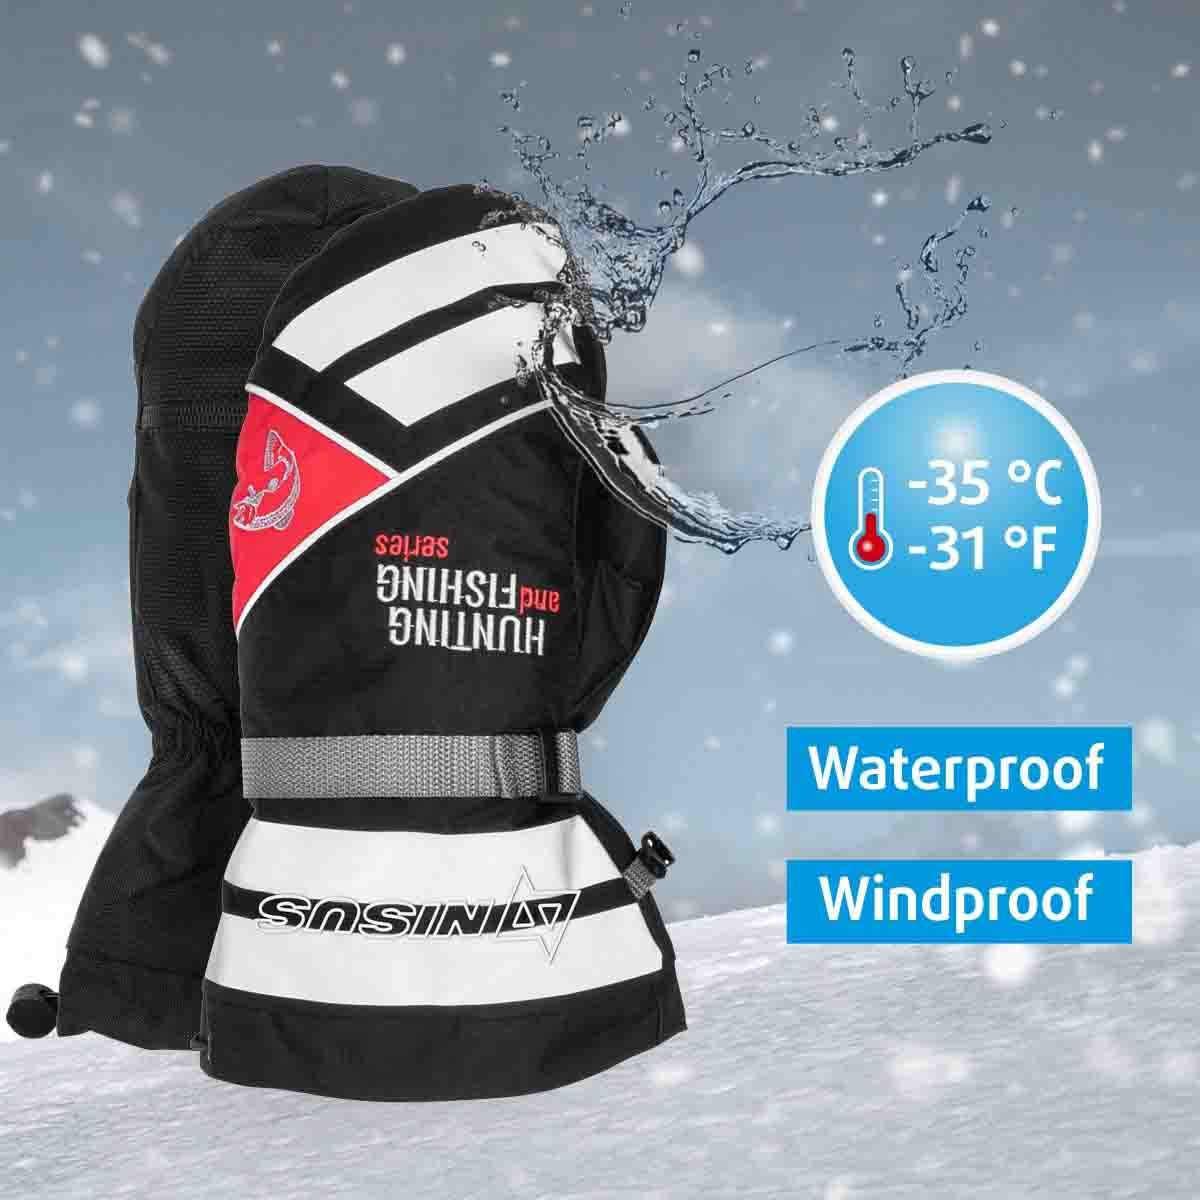 Professional Winter Waterproof Breathable Mittens for Ice Fishing, Black/White/Red, XL